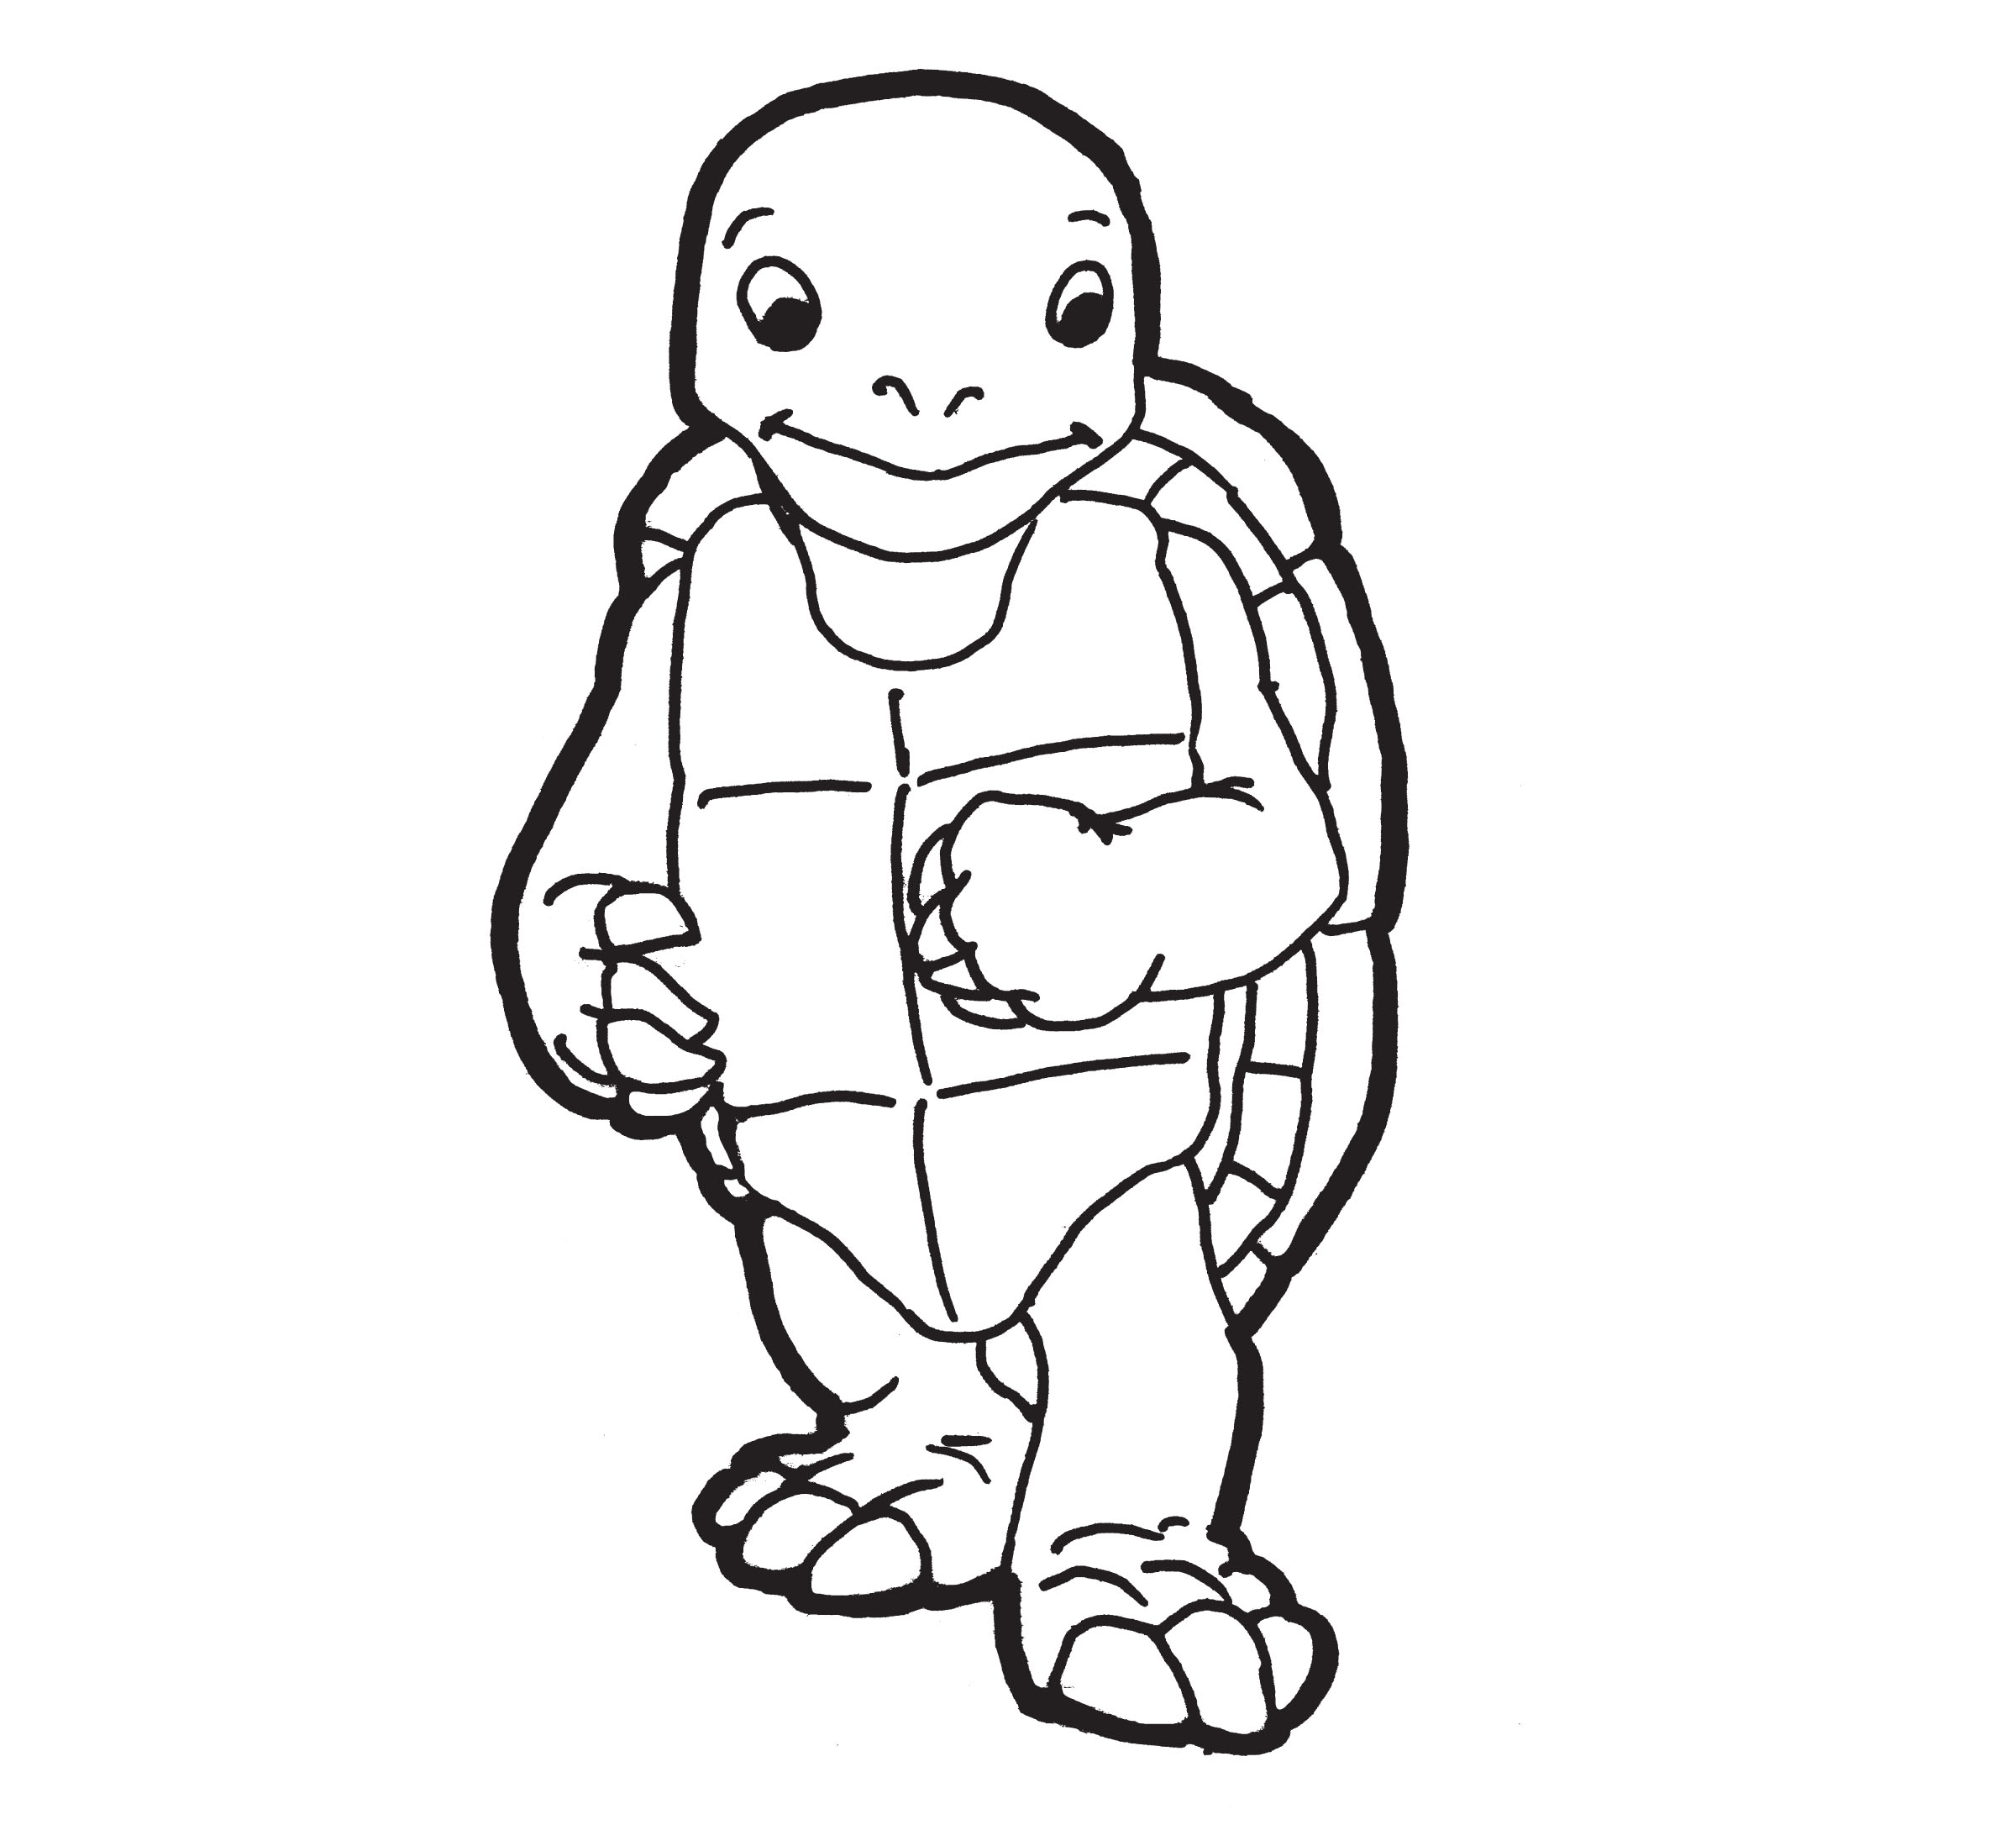 Free Printable Turtle Coloring Pages For Kids - Animal Place